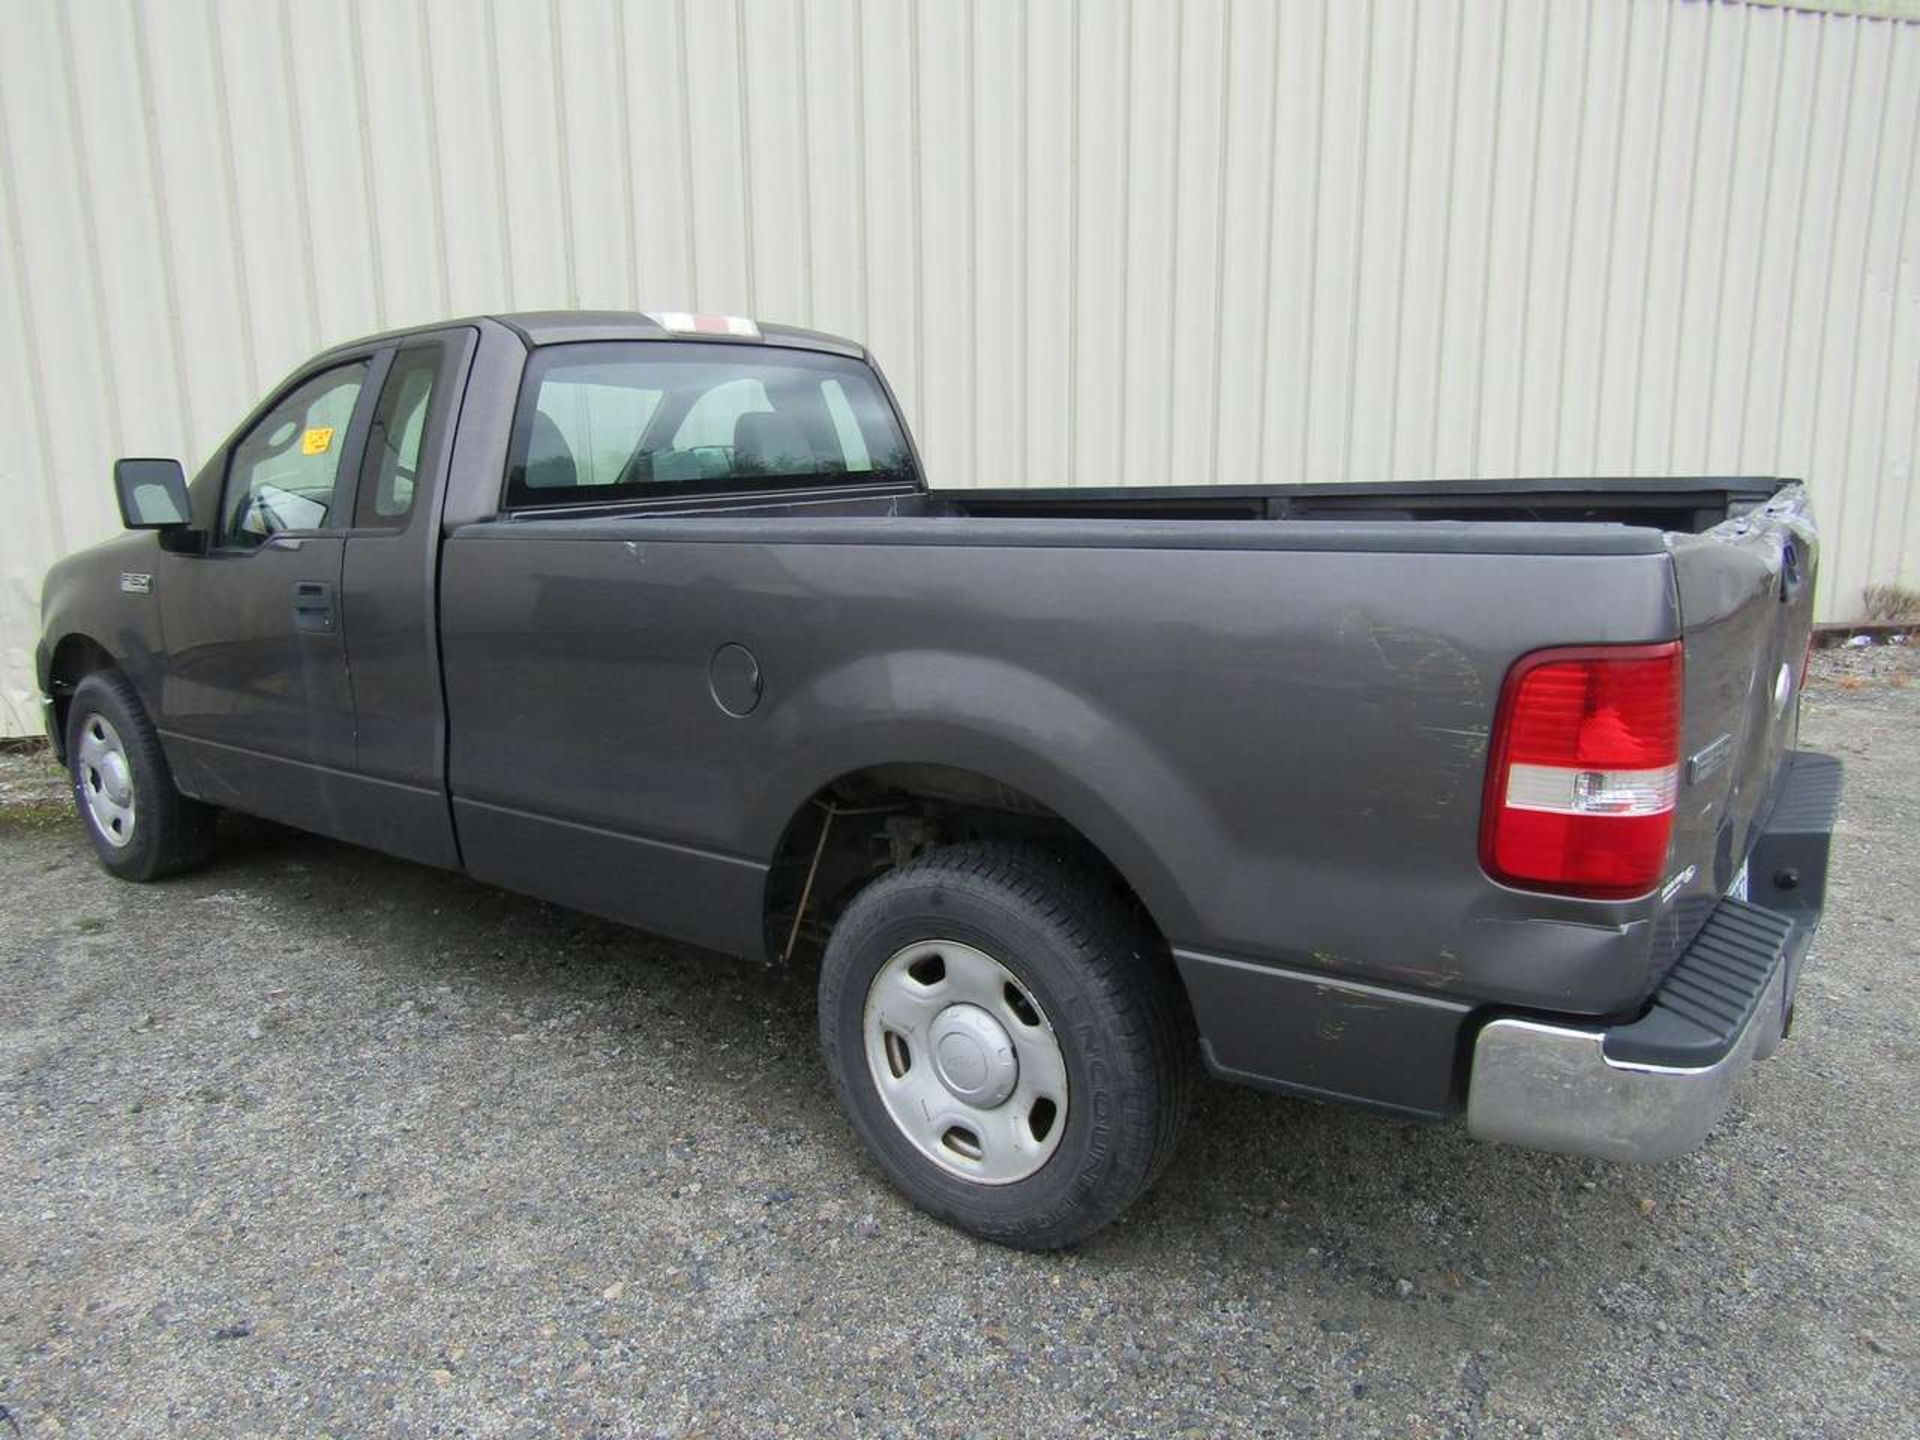 2007 Ford F-150 XL Triton Pick-Up Truck 4.6L V8 Engine, 8' Bed, GVWR 6800 lbs., 108687 Miles, S/N - Image 3 of 7